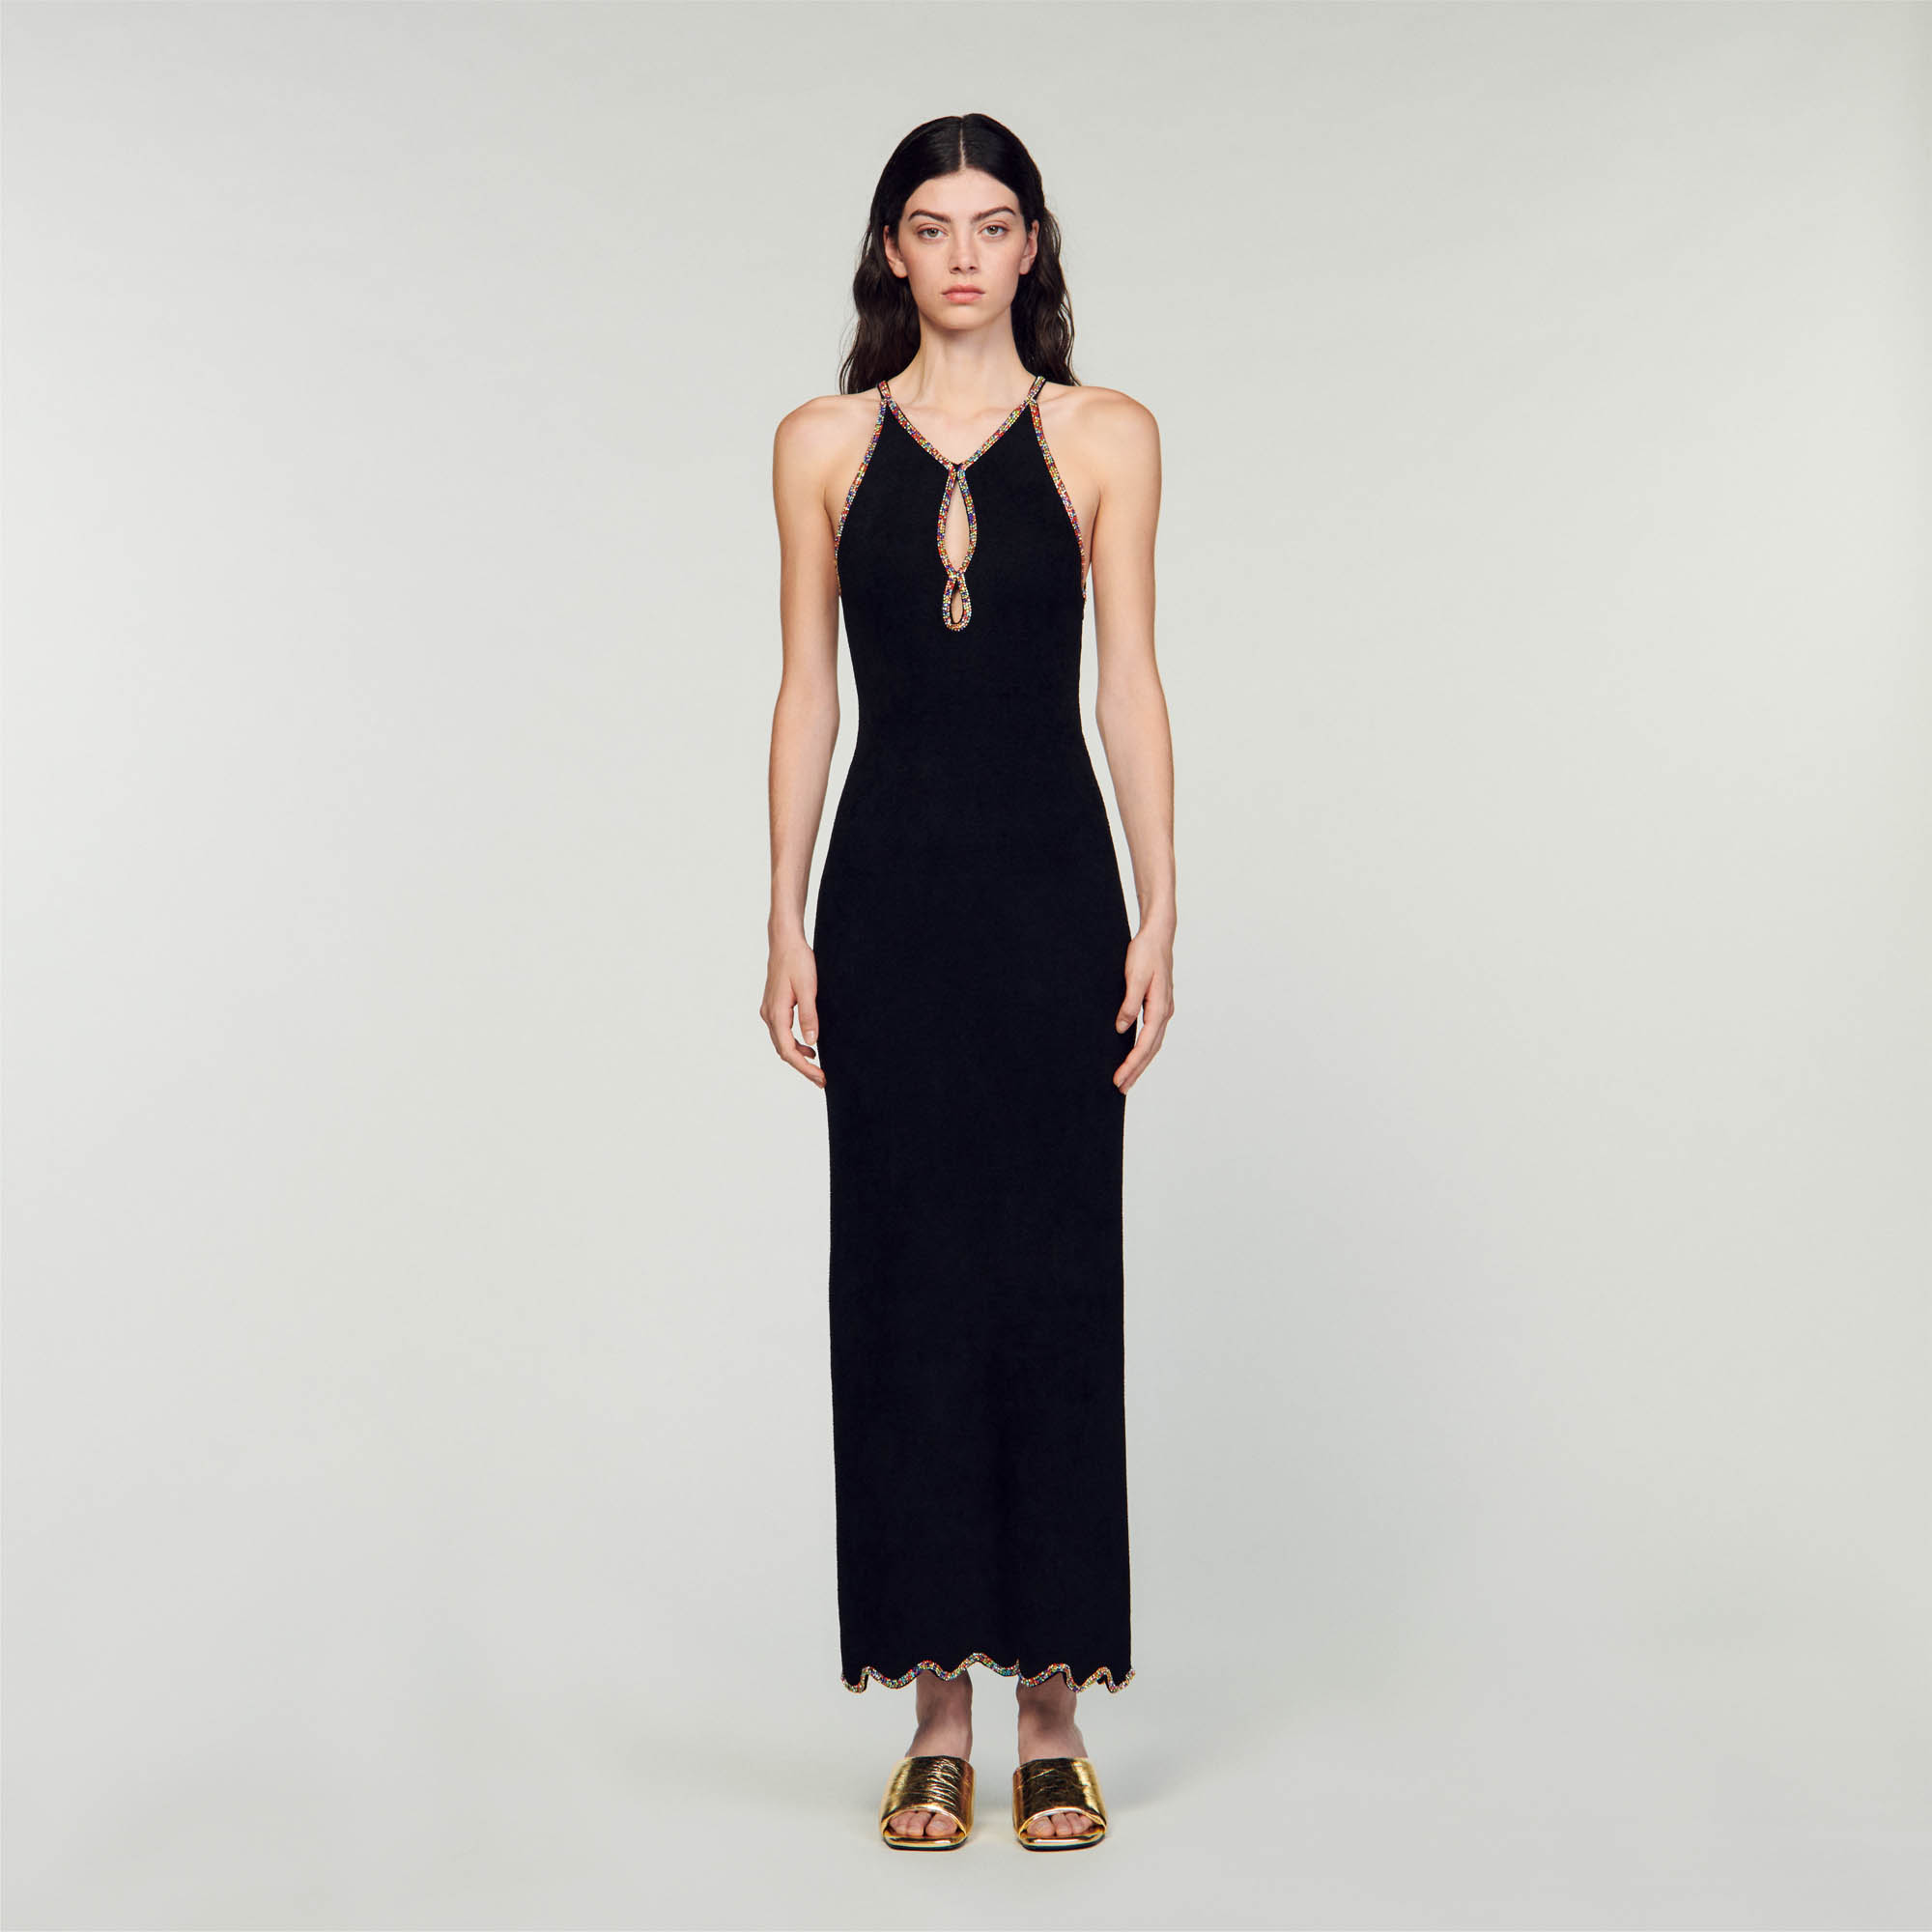 Sandro viscose Maxi dress in velvet knit with American-style armholes, featuring a neck with a cutaway teardrop embellished with multicoloured rhinestones and slit at the back